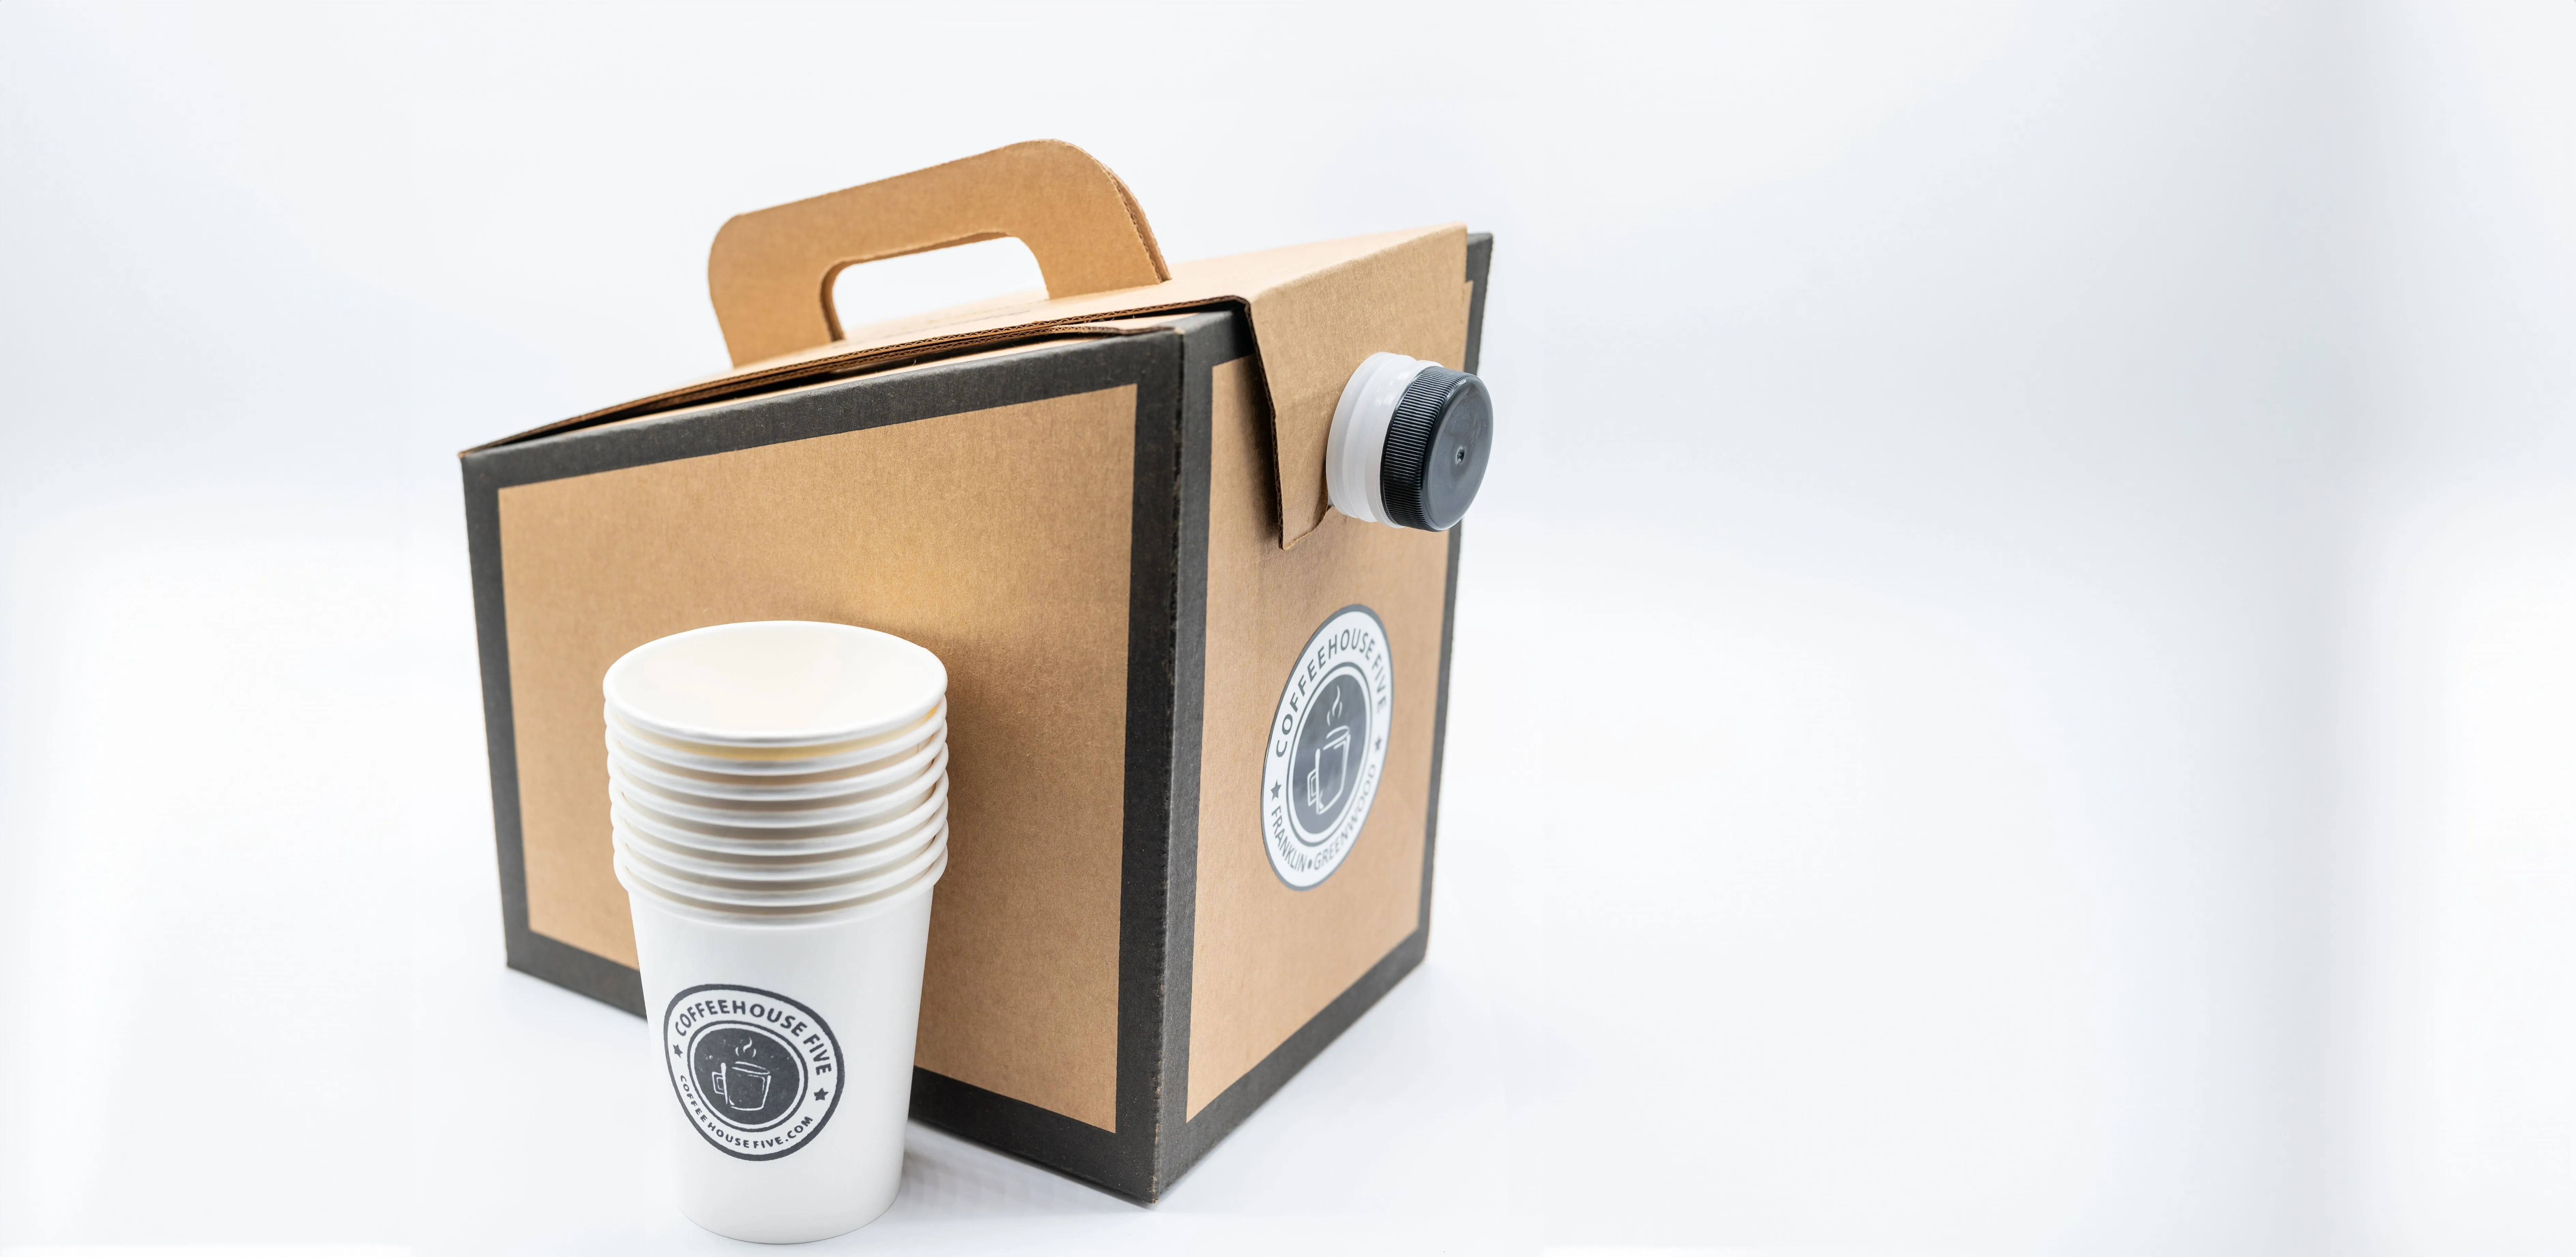 Cardboard portable coffee dispenser with a stack of white paper cups on a white background.